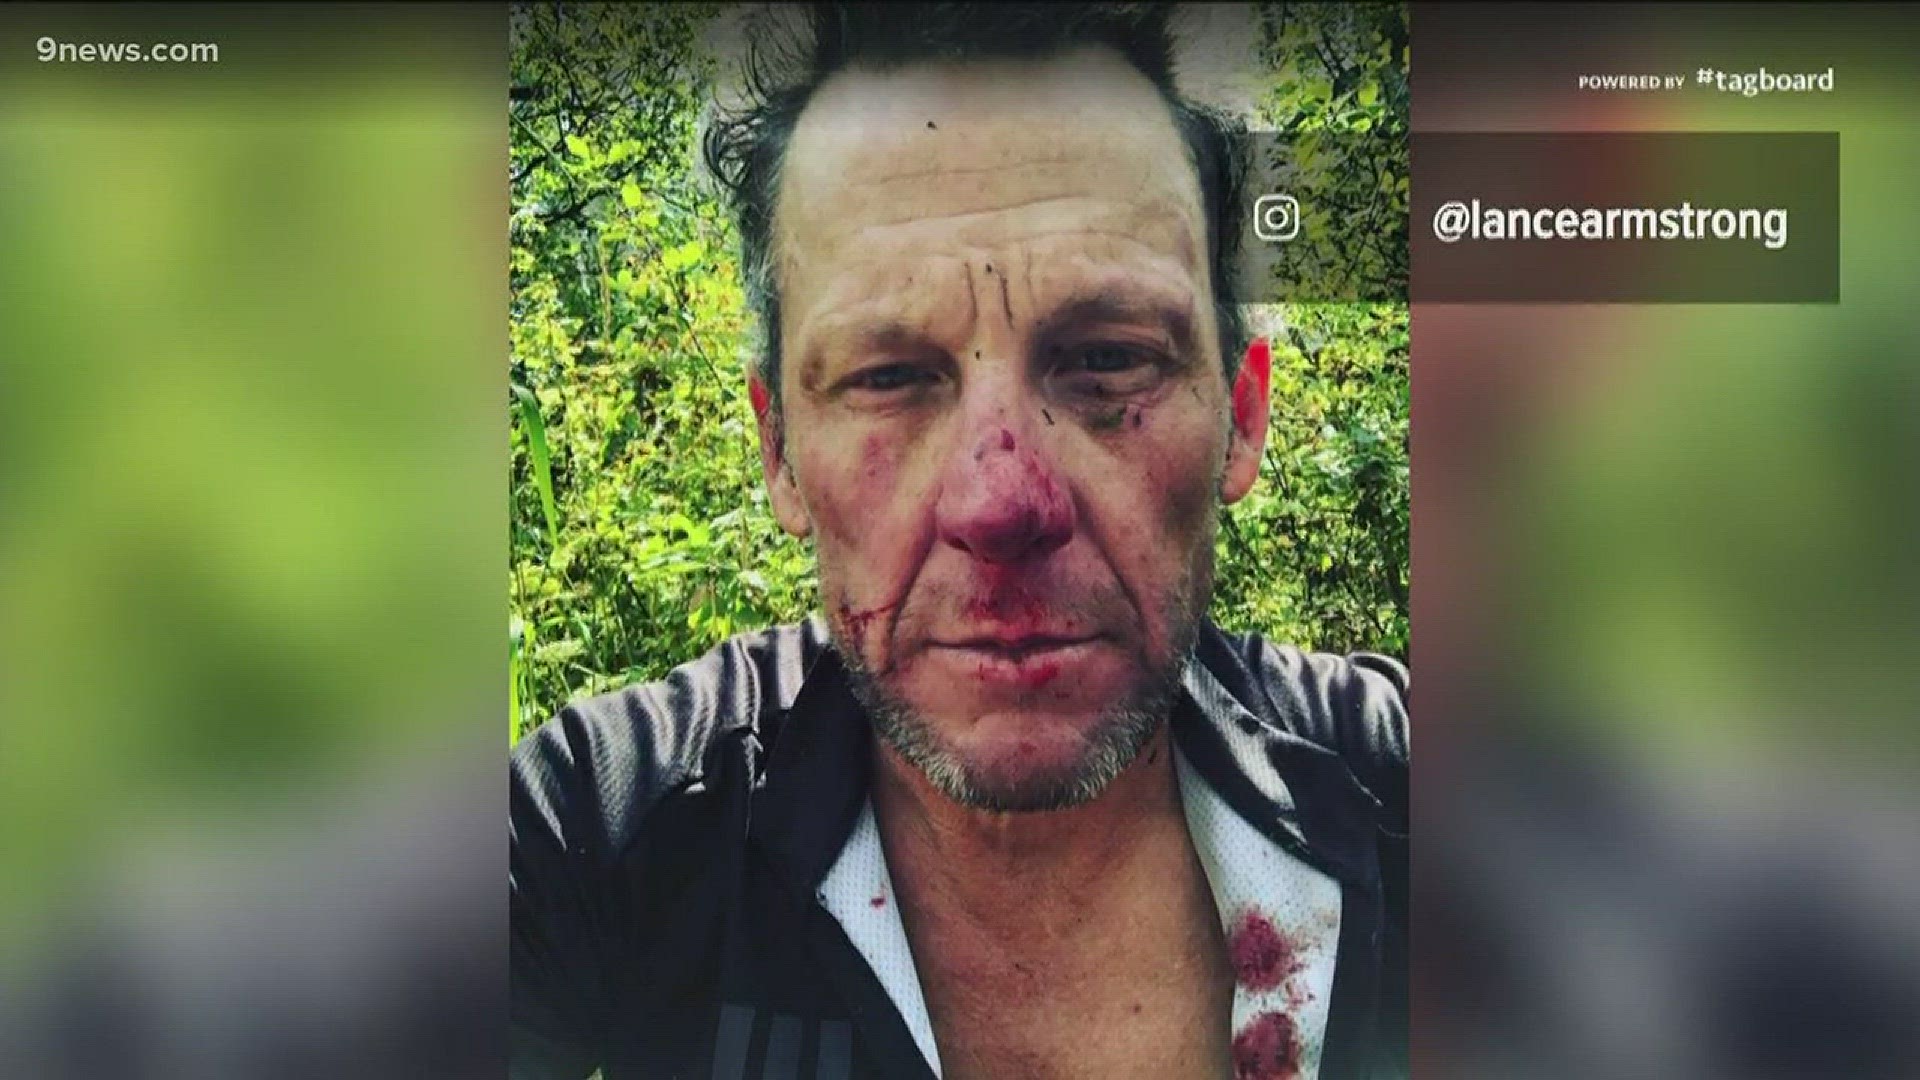 Lance Armstrong was mountain biking in Snowmass on Wednesday when he had to make a trip to the hospital.